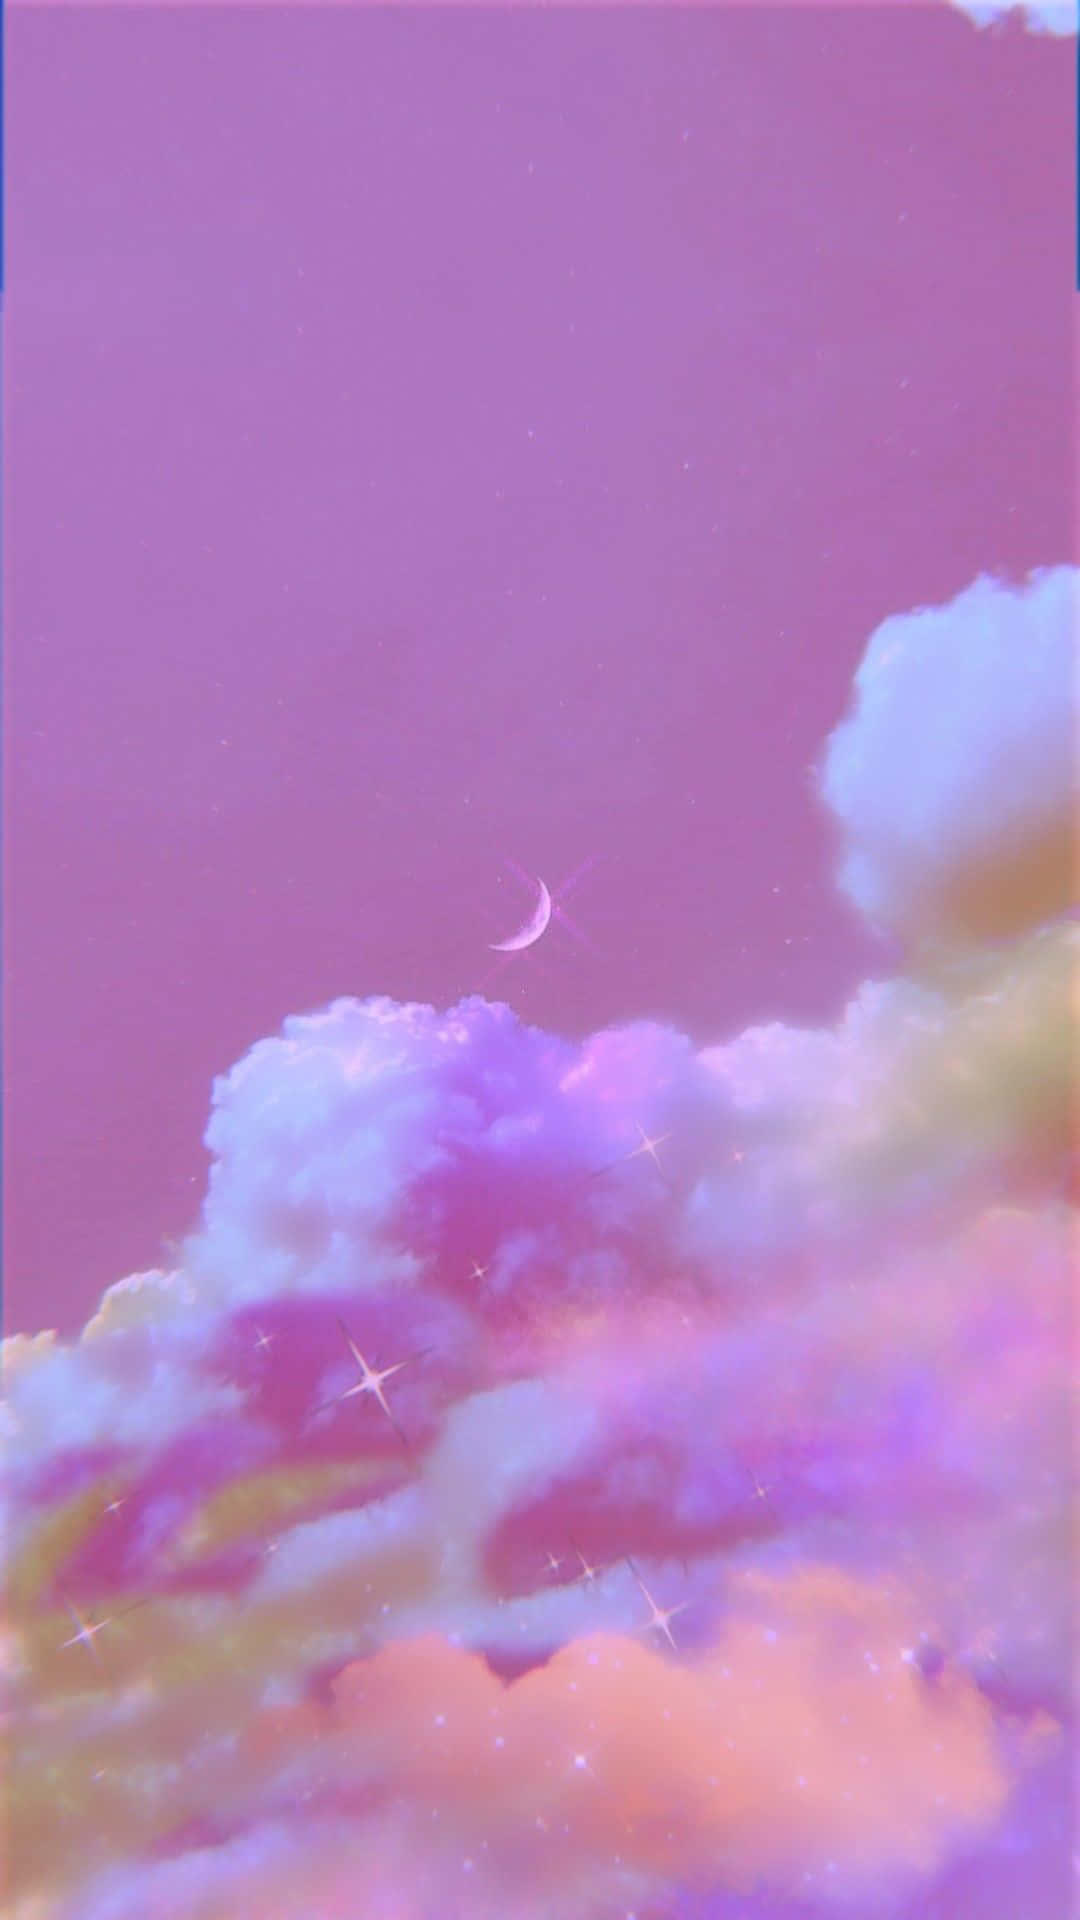 Aesthetic phone background of a pink sky with a crescent moon and stars - Violet